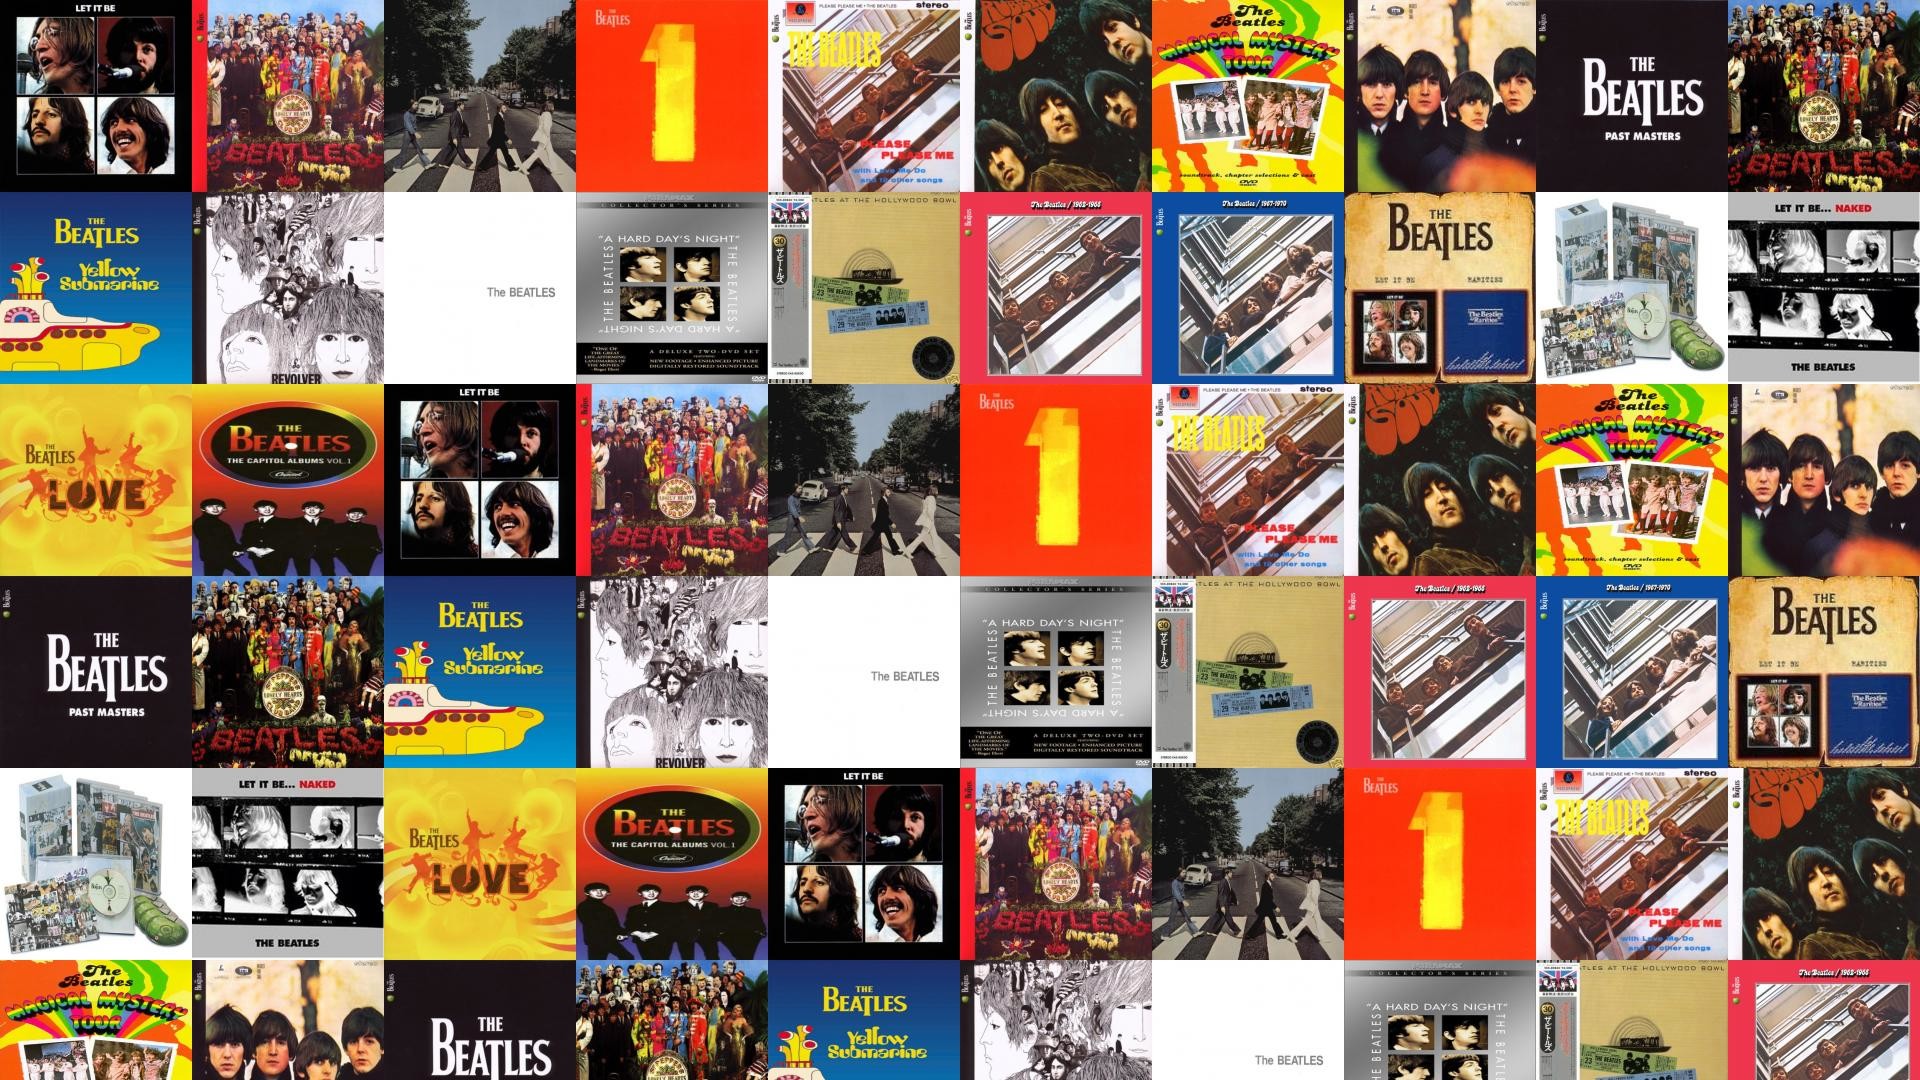 1920x1080 The Beatles Desktop Wallpaper Abbey Road Images & Pictures - Becuo